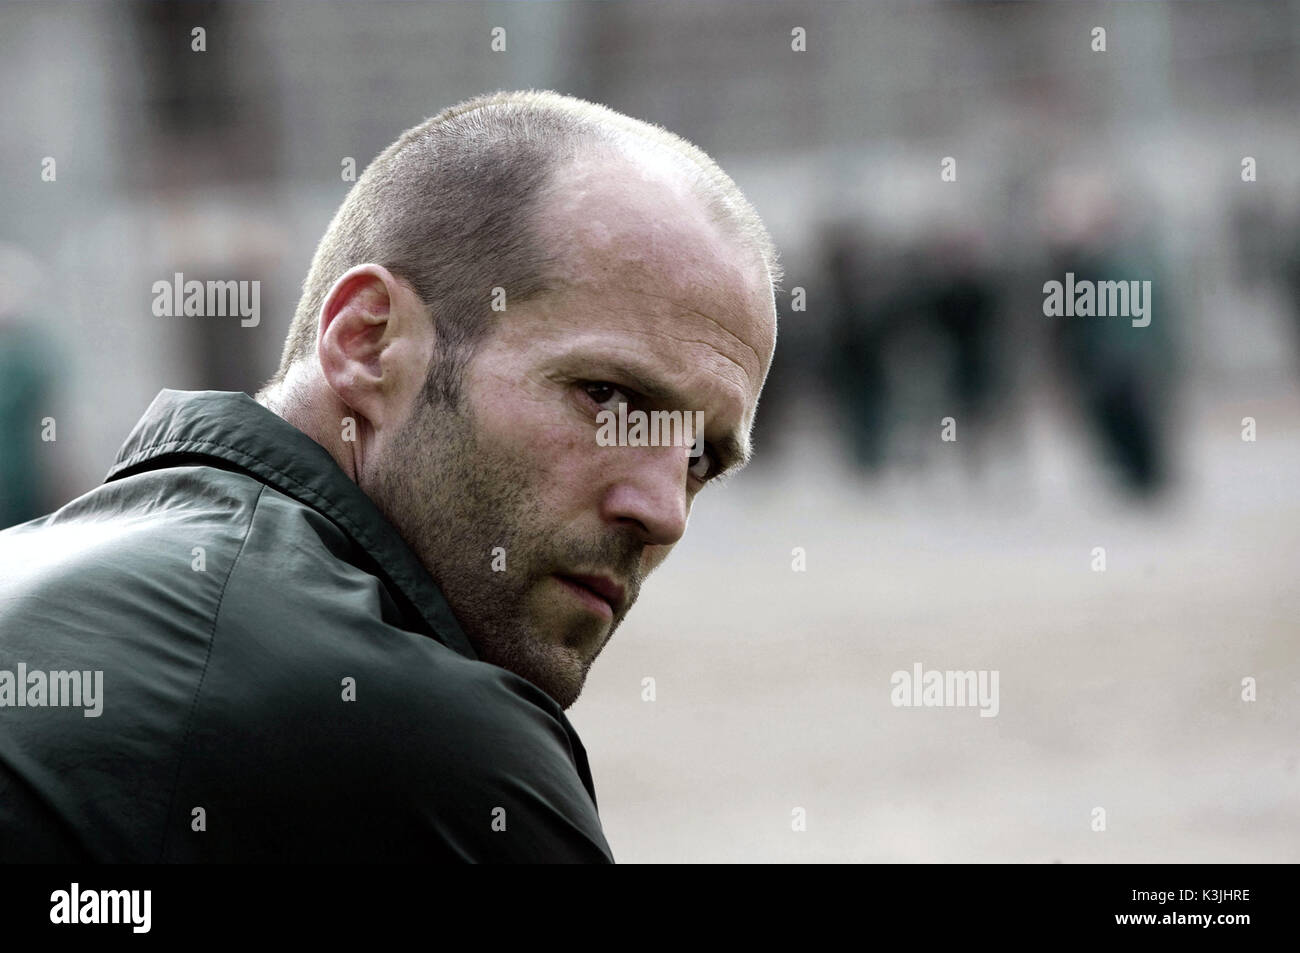 DEATH RACE JASON STATHAM as Jensen Ames in an action-thriller set in the near future. DEATH RACE     Date: 2008 Stock Photo